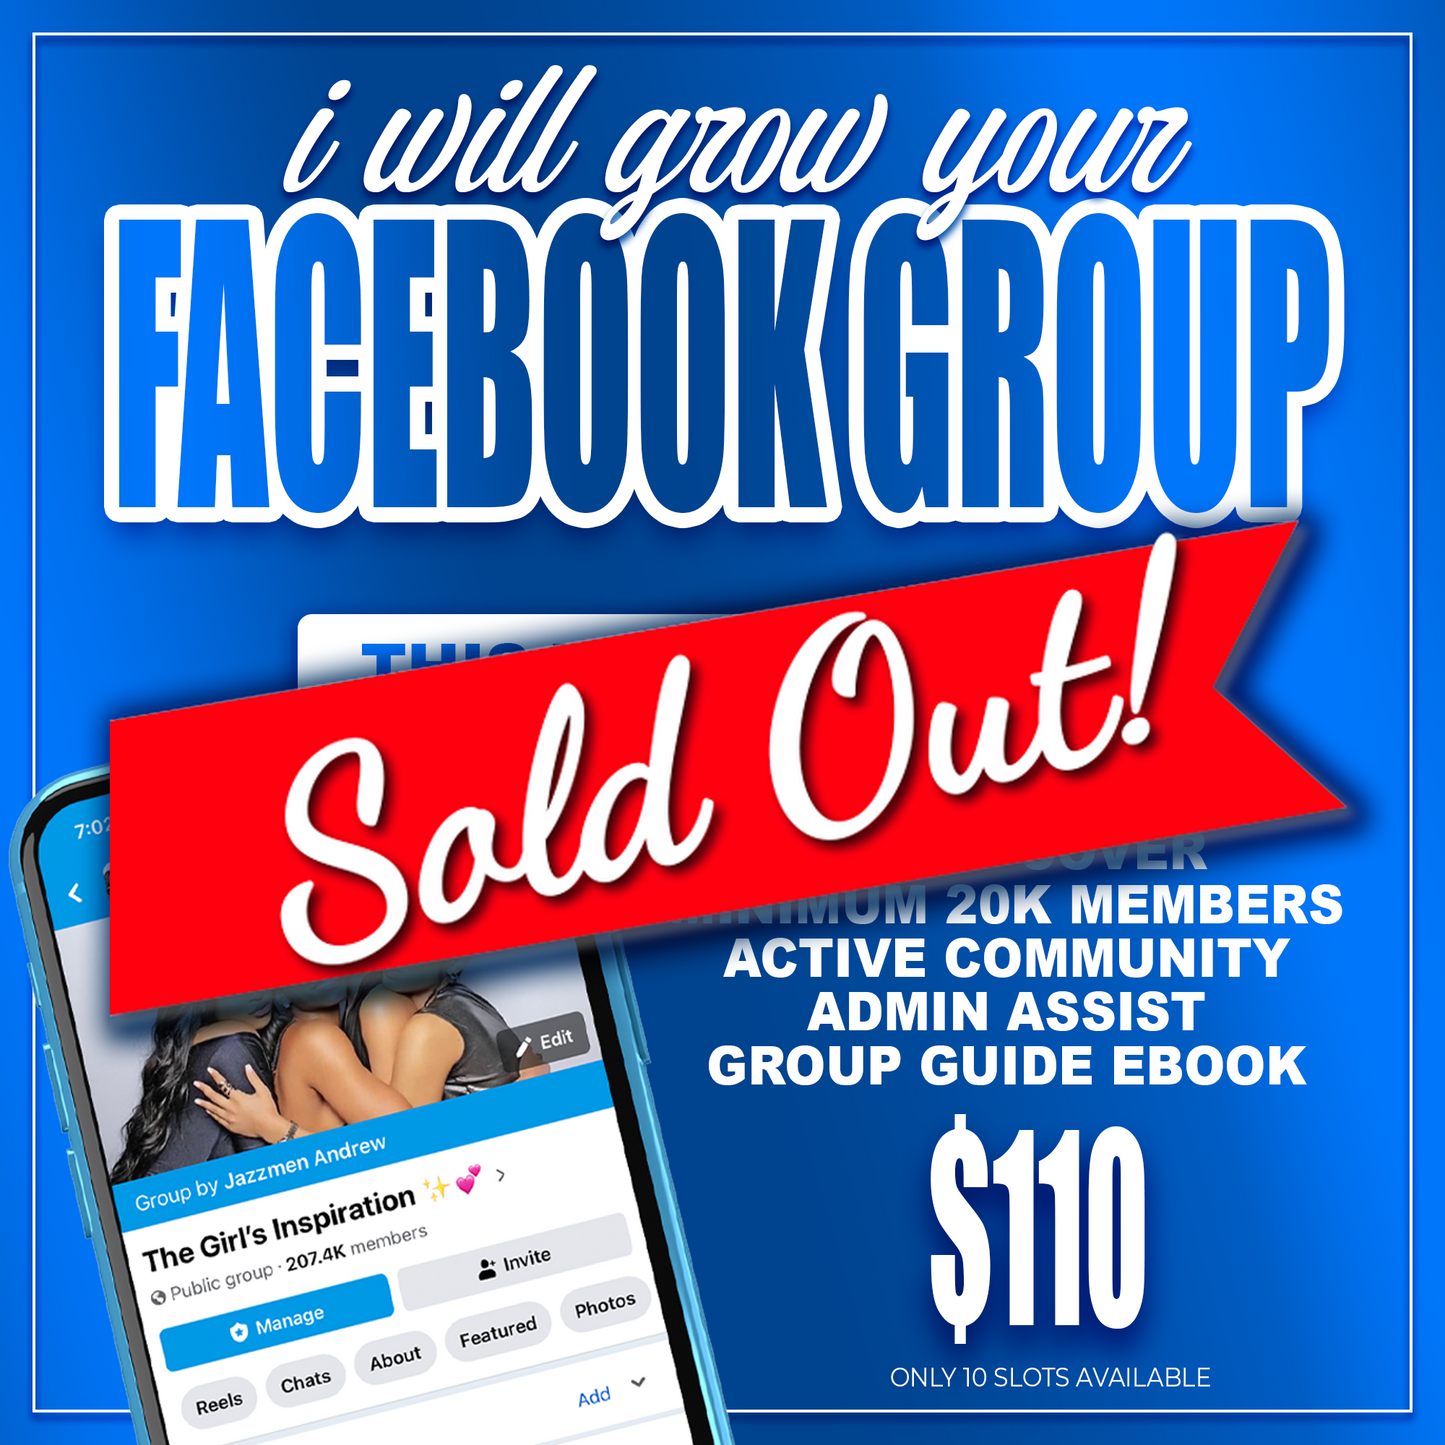 Facebook Group Creation & Growth Service